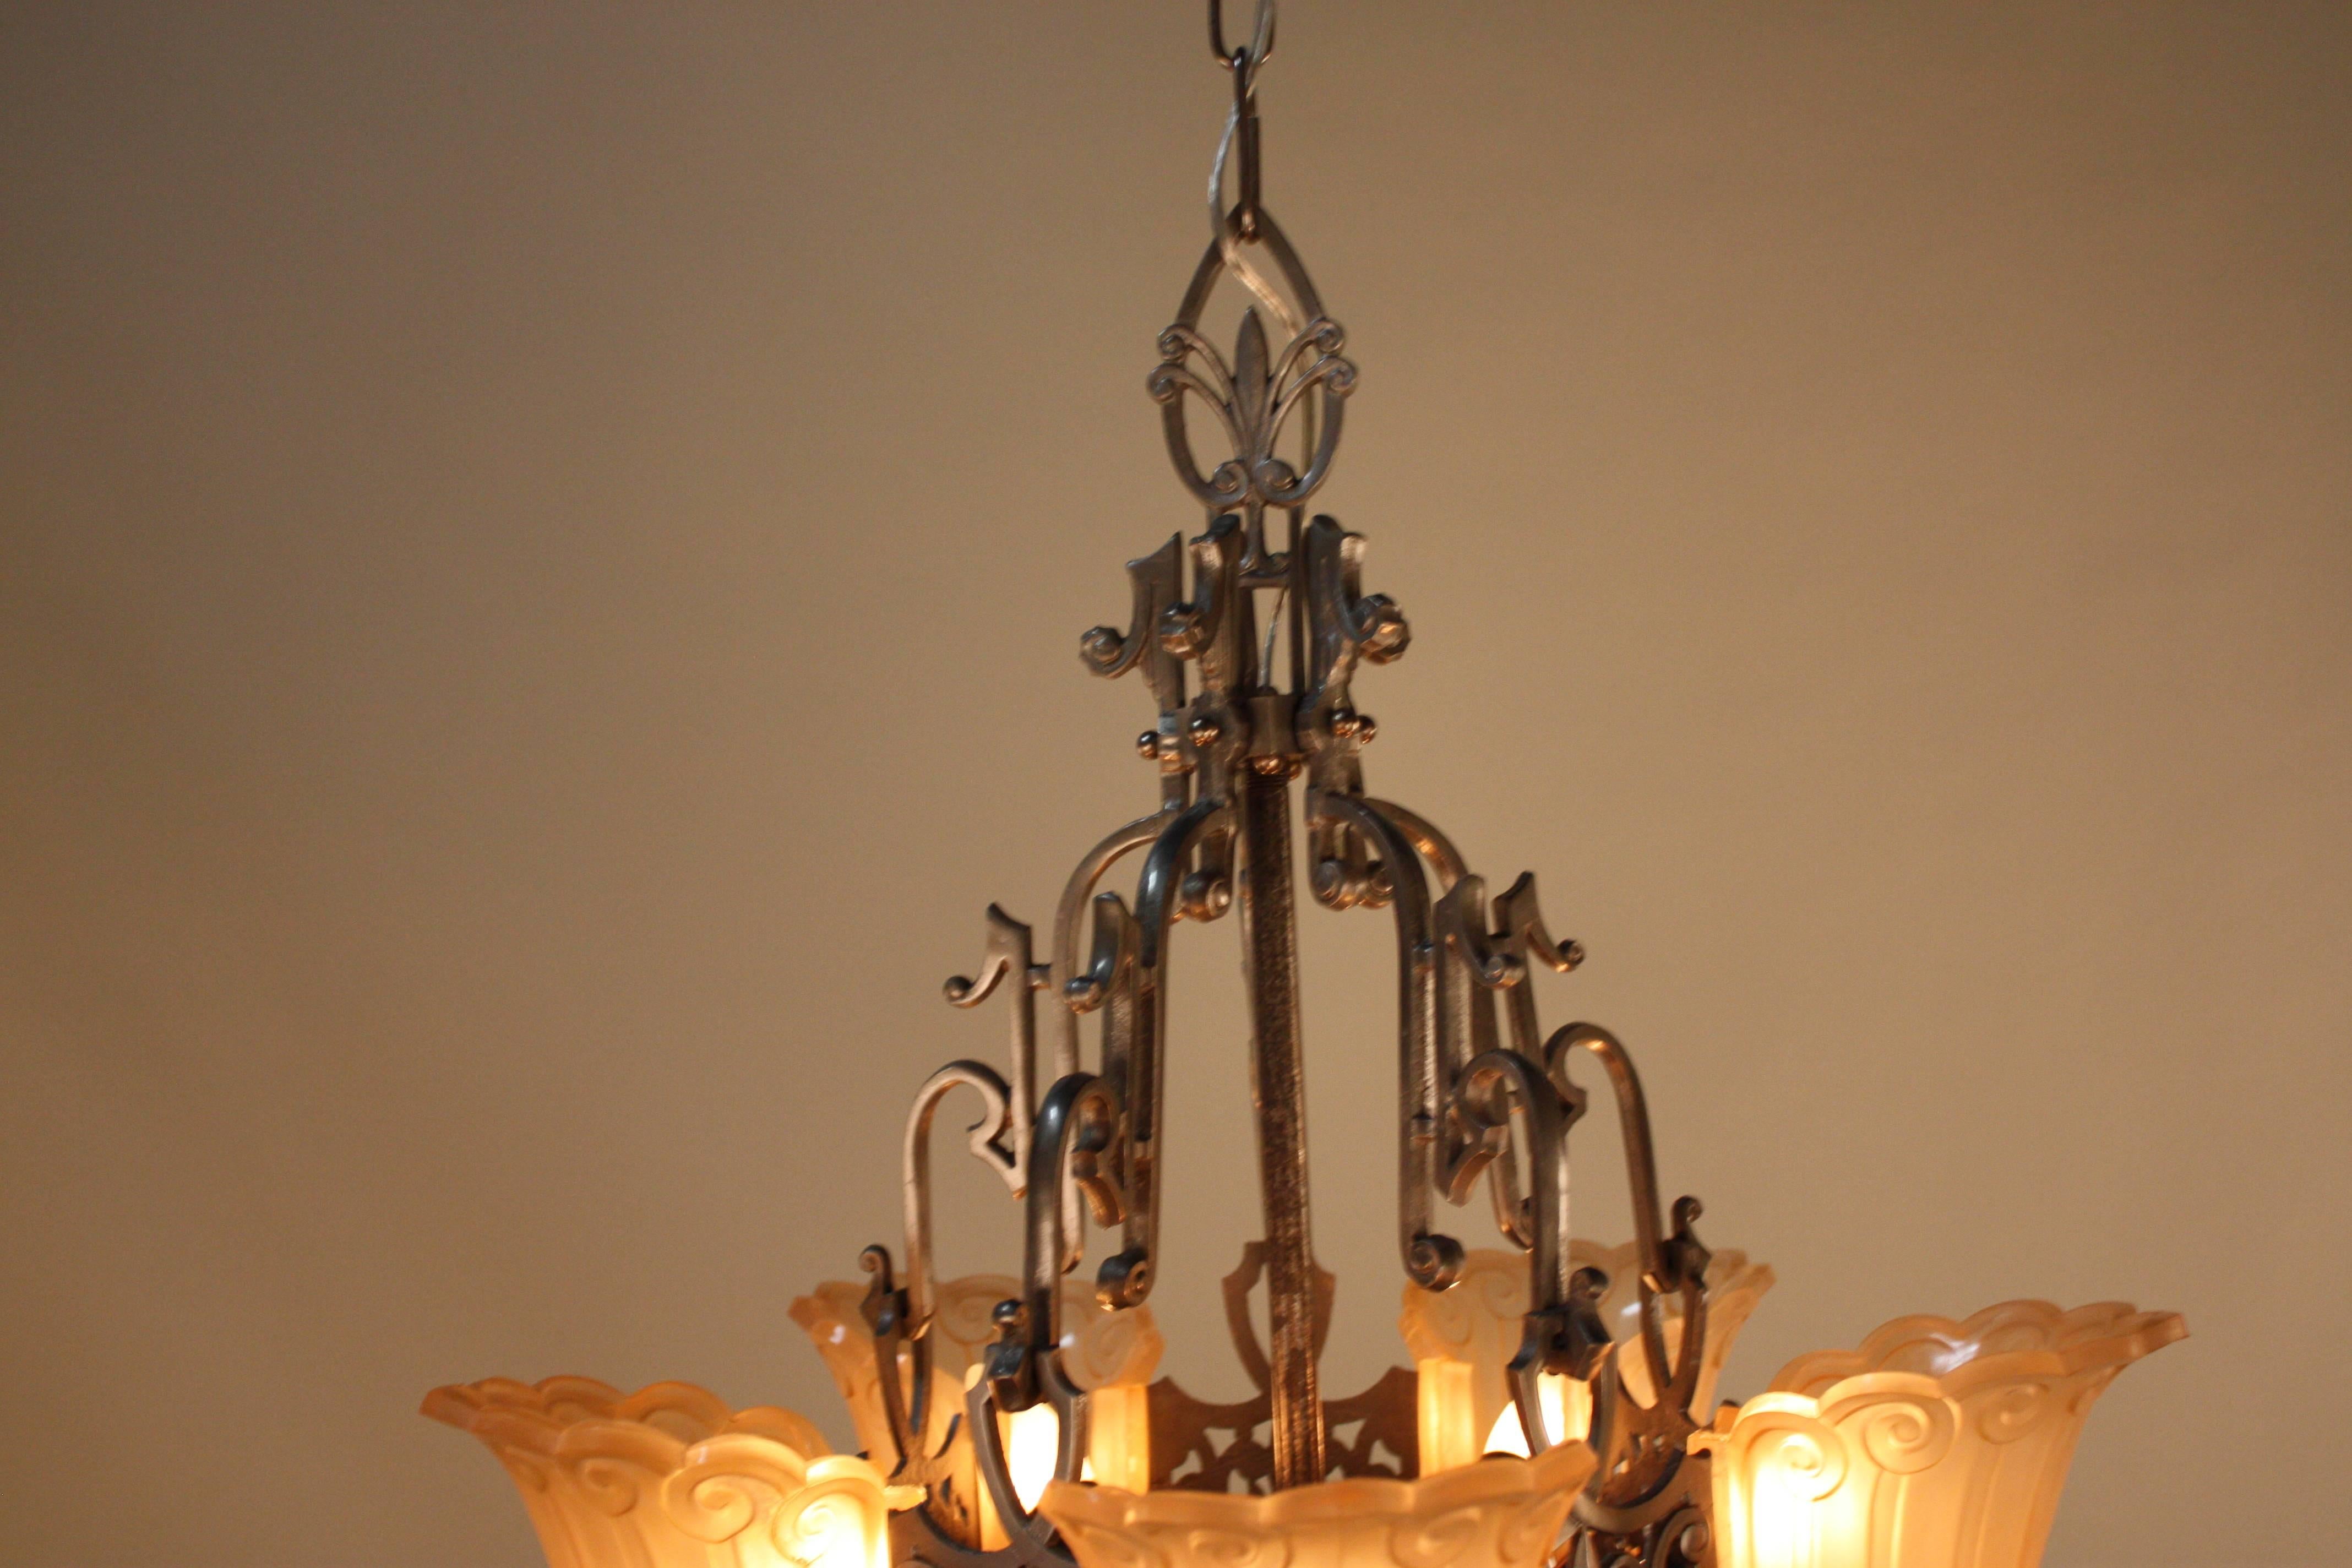 American Art Deco Five-Light Slip Shade Chandelier by Lincoln 2